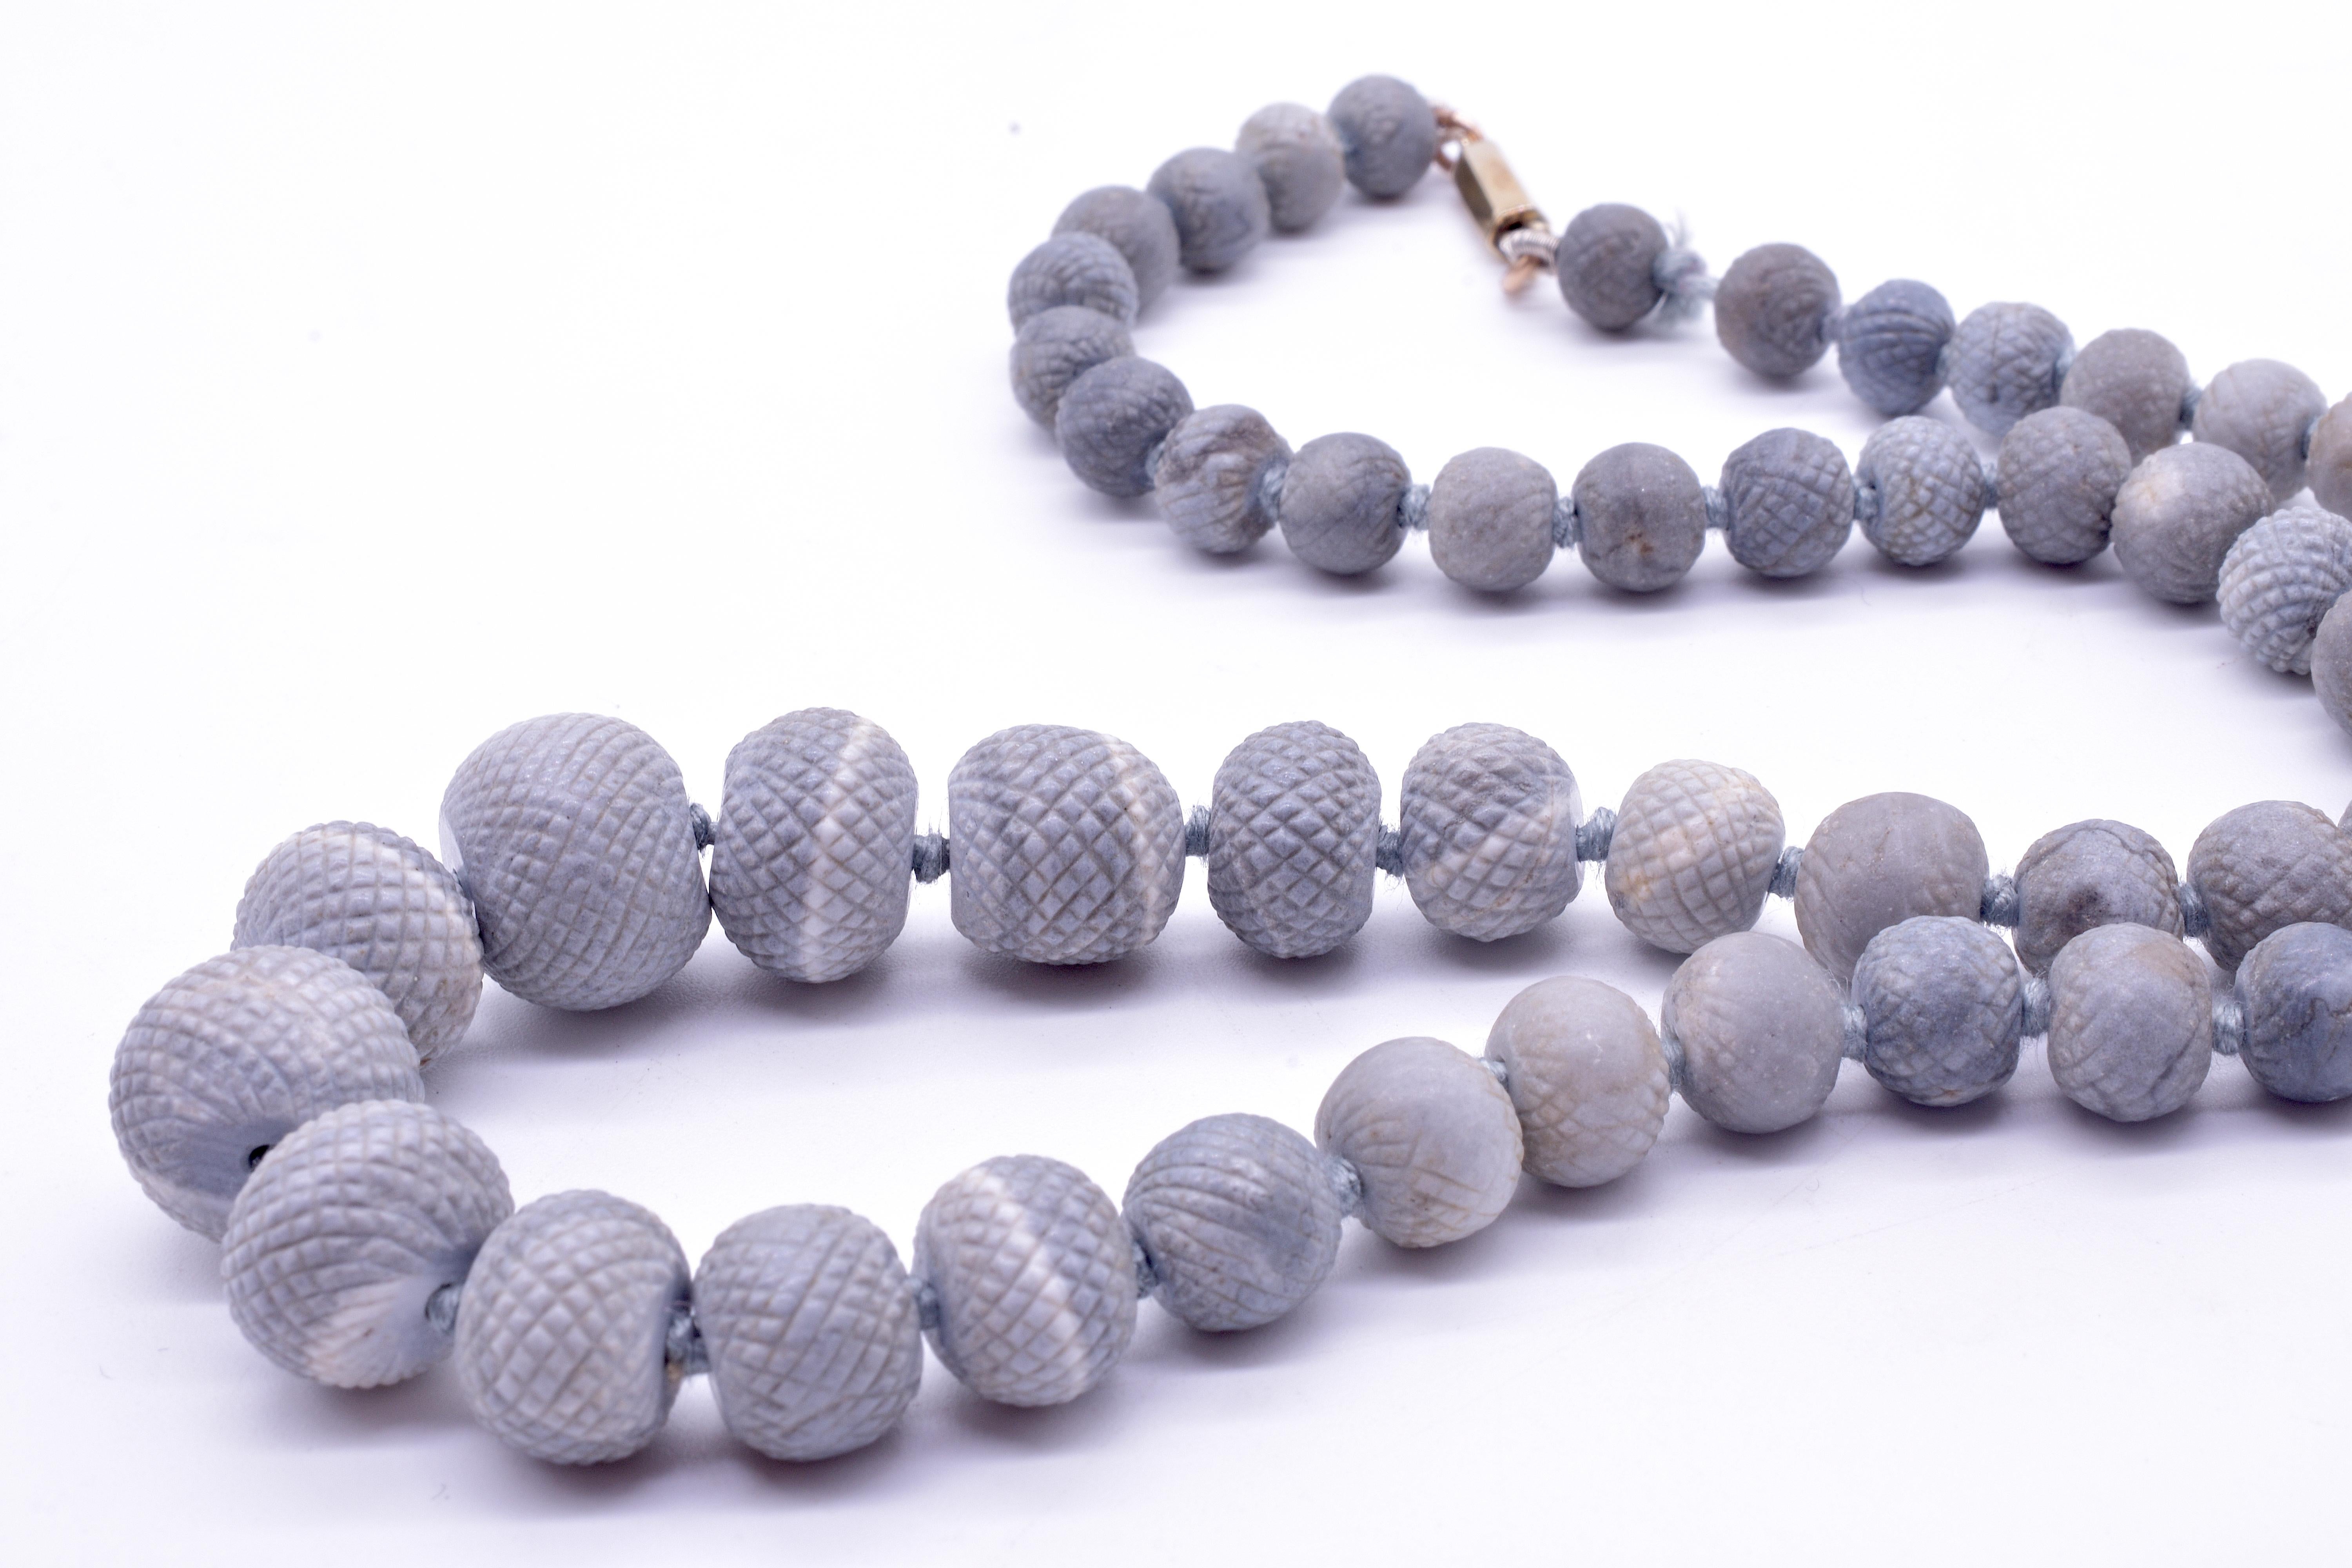 Lovely soft gray rare lava beads mined from the ruins of Pompeii in Italy. Pineapples were a symbol of luxury in the 1700's and were brought to Europe from Asia in the 1600's. Lava jewelry was made from the lava of Mt. Vesuvius, probably as souvenir